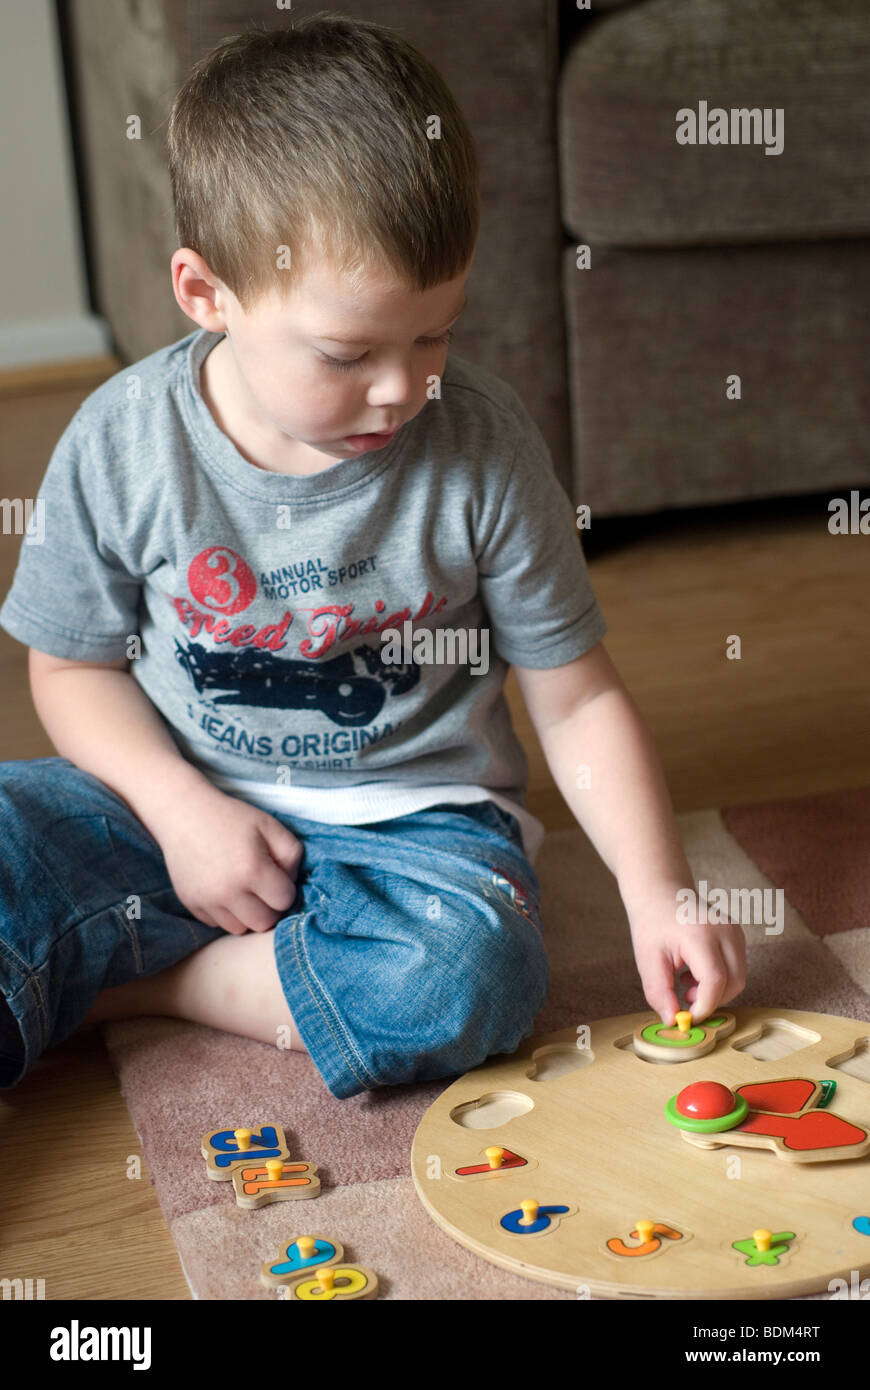 Telling the time,adventure, child, children, bedroom, playing, toy, kid, young, fun, home, house, interaction, fun, happy, Stock Photo